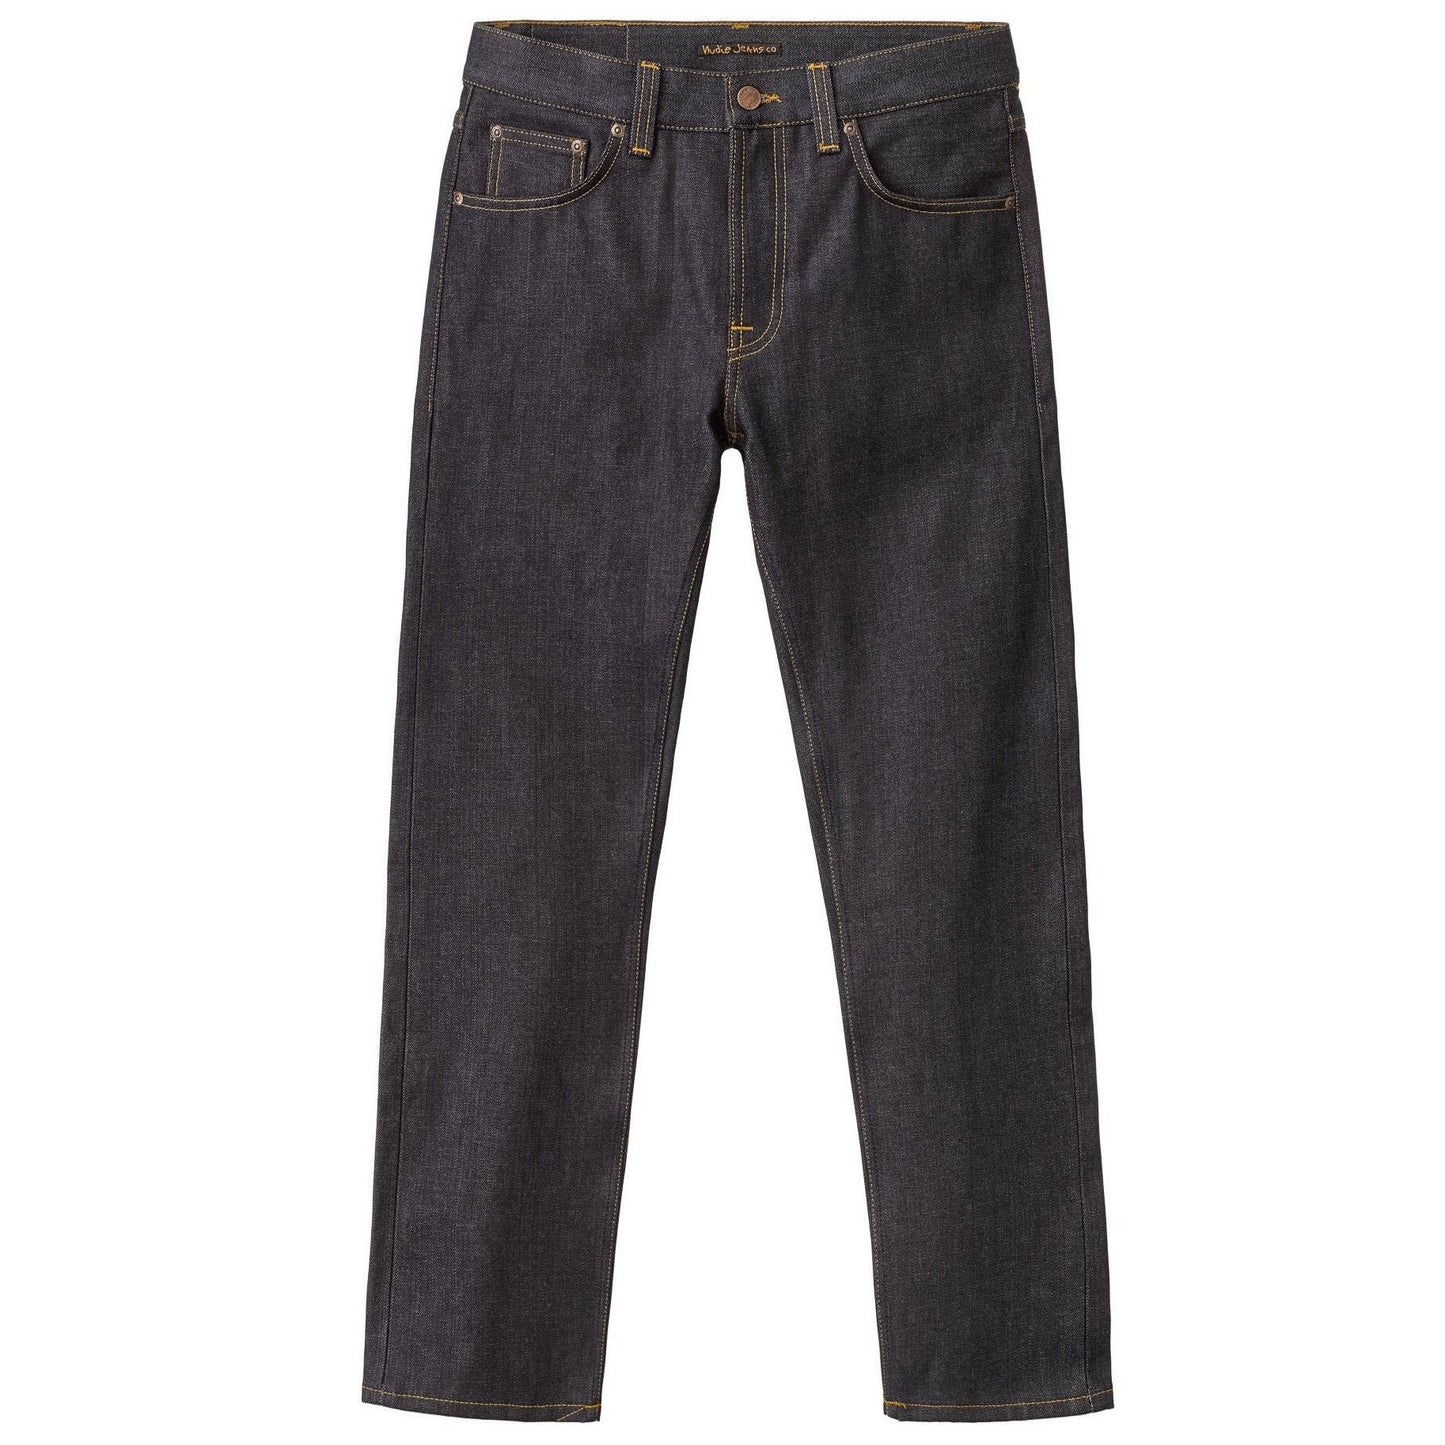 Nudie Jeans Co. Gritty Jackson